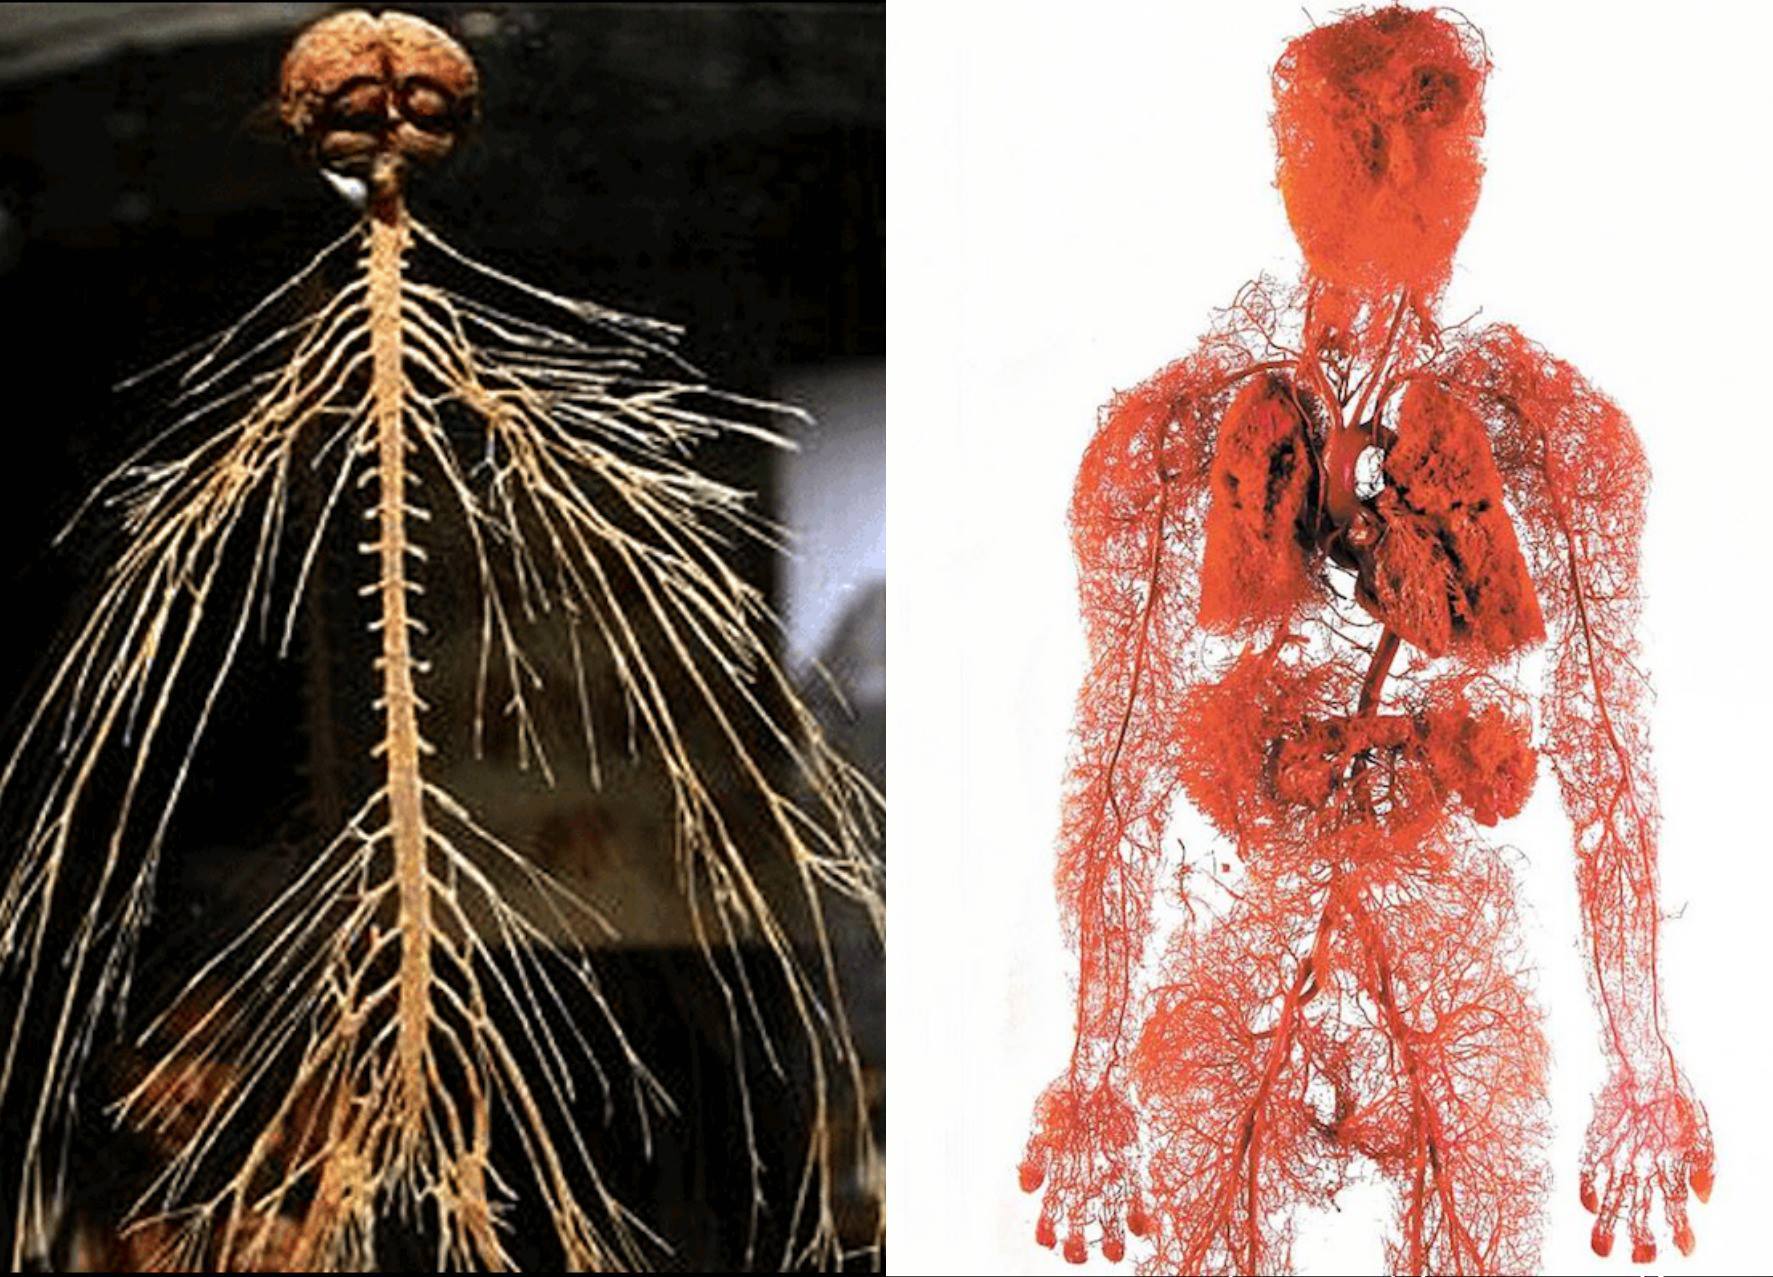 blood_vessels_and_nerves_in_human_body.jpg